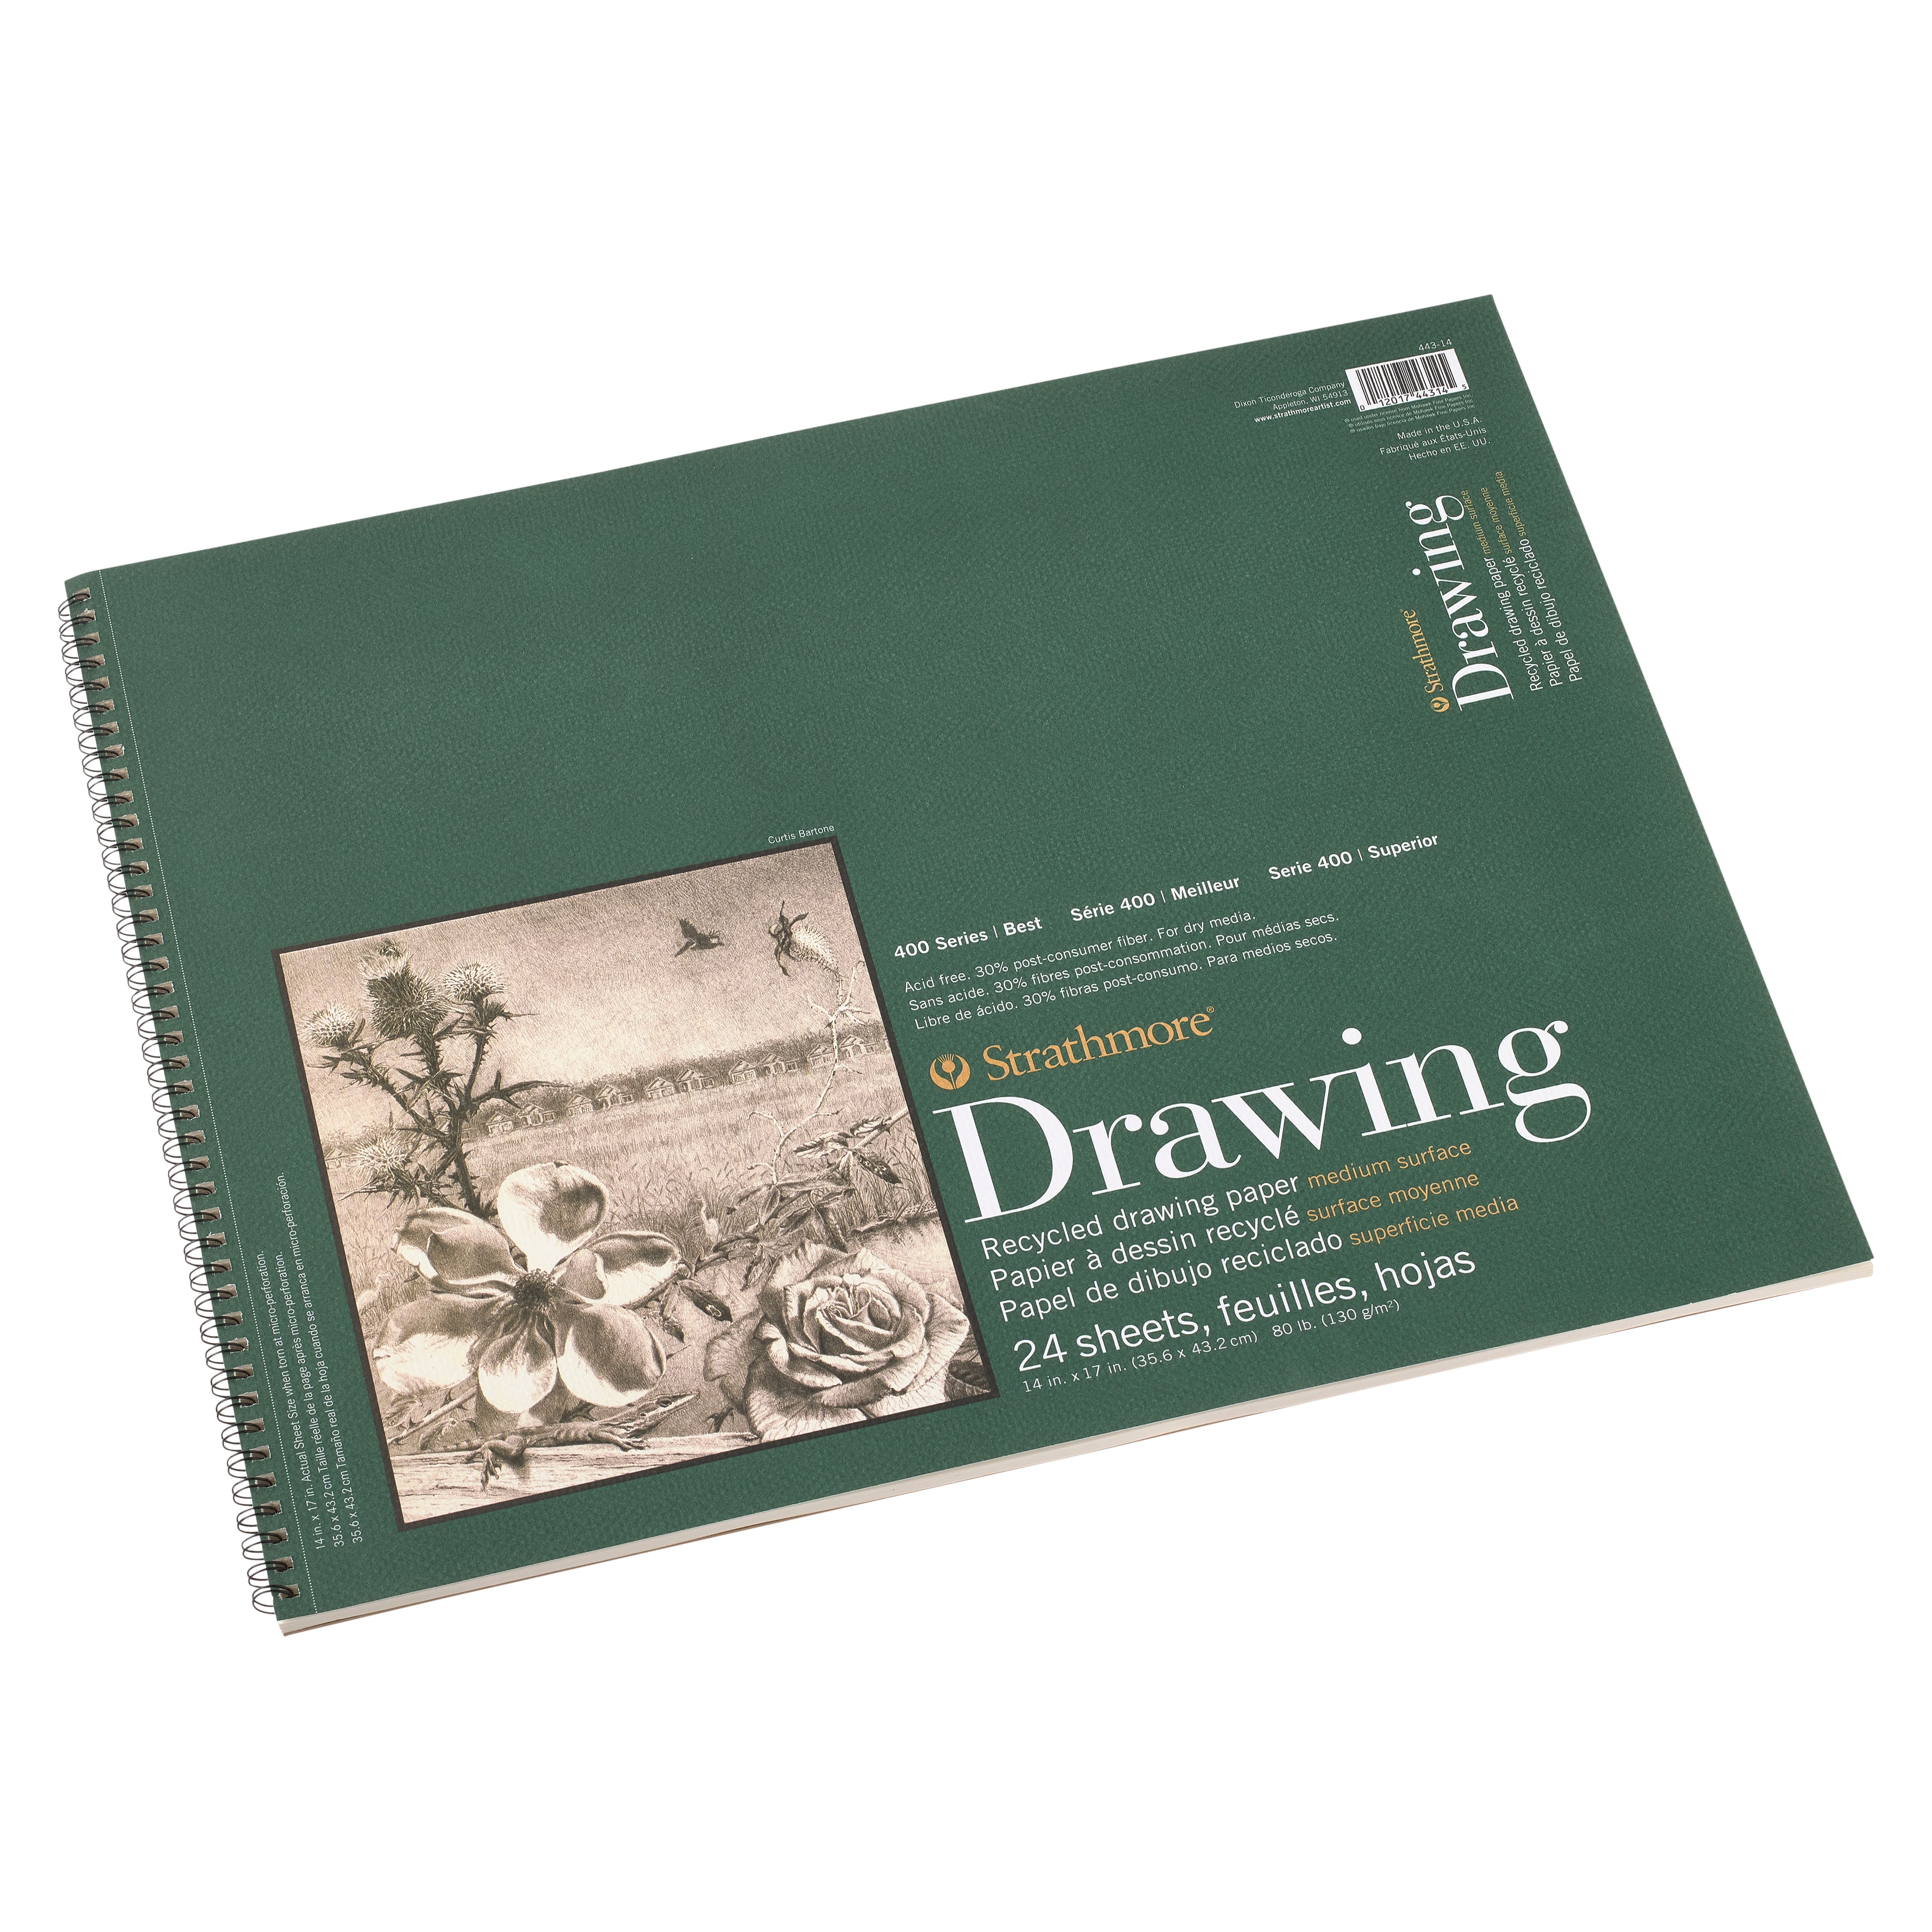 Strathmore 400 Series Recycled Drawing Pad - 24 x 18, Landscape, 24 Sheets